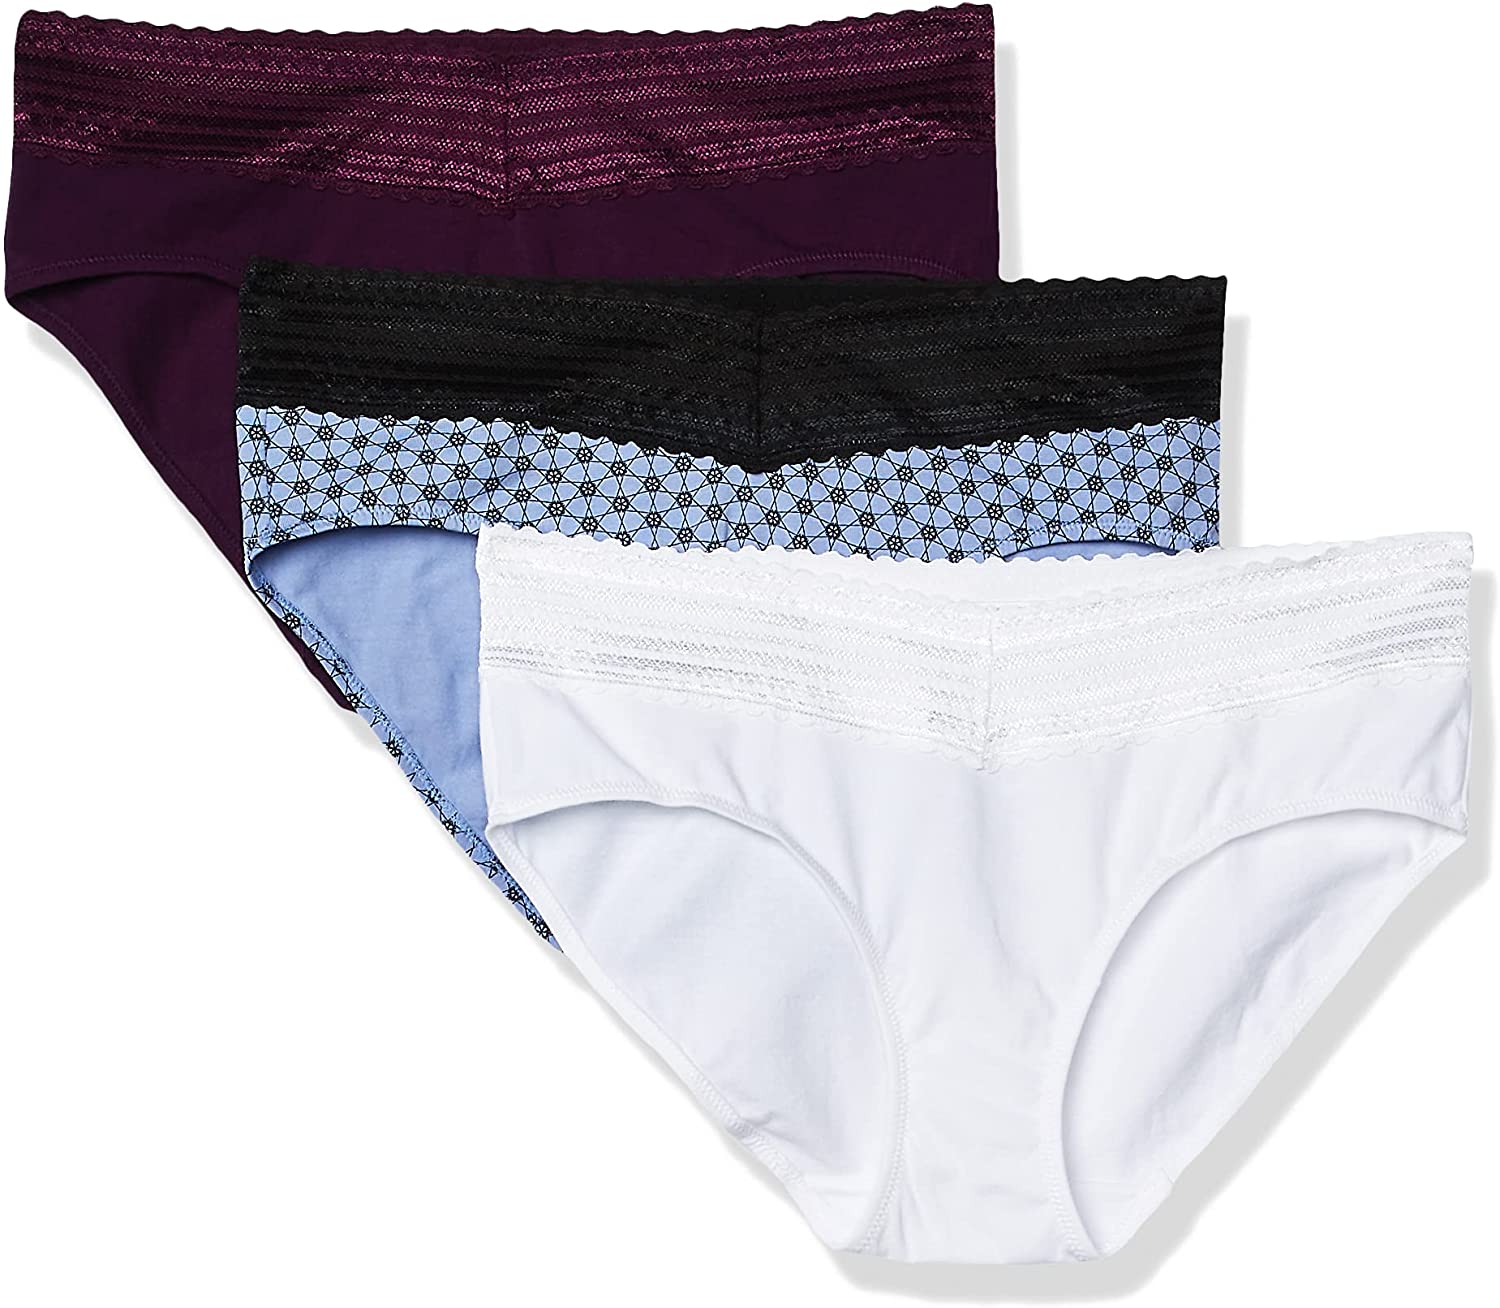 Gubotare Boxers For Women womens Blissful Benefits No Muffin Top